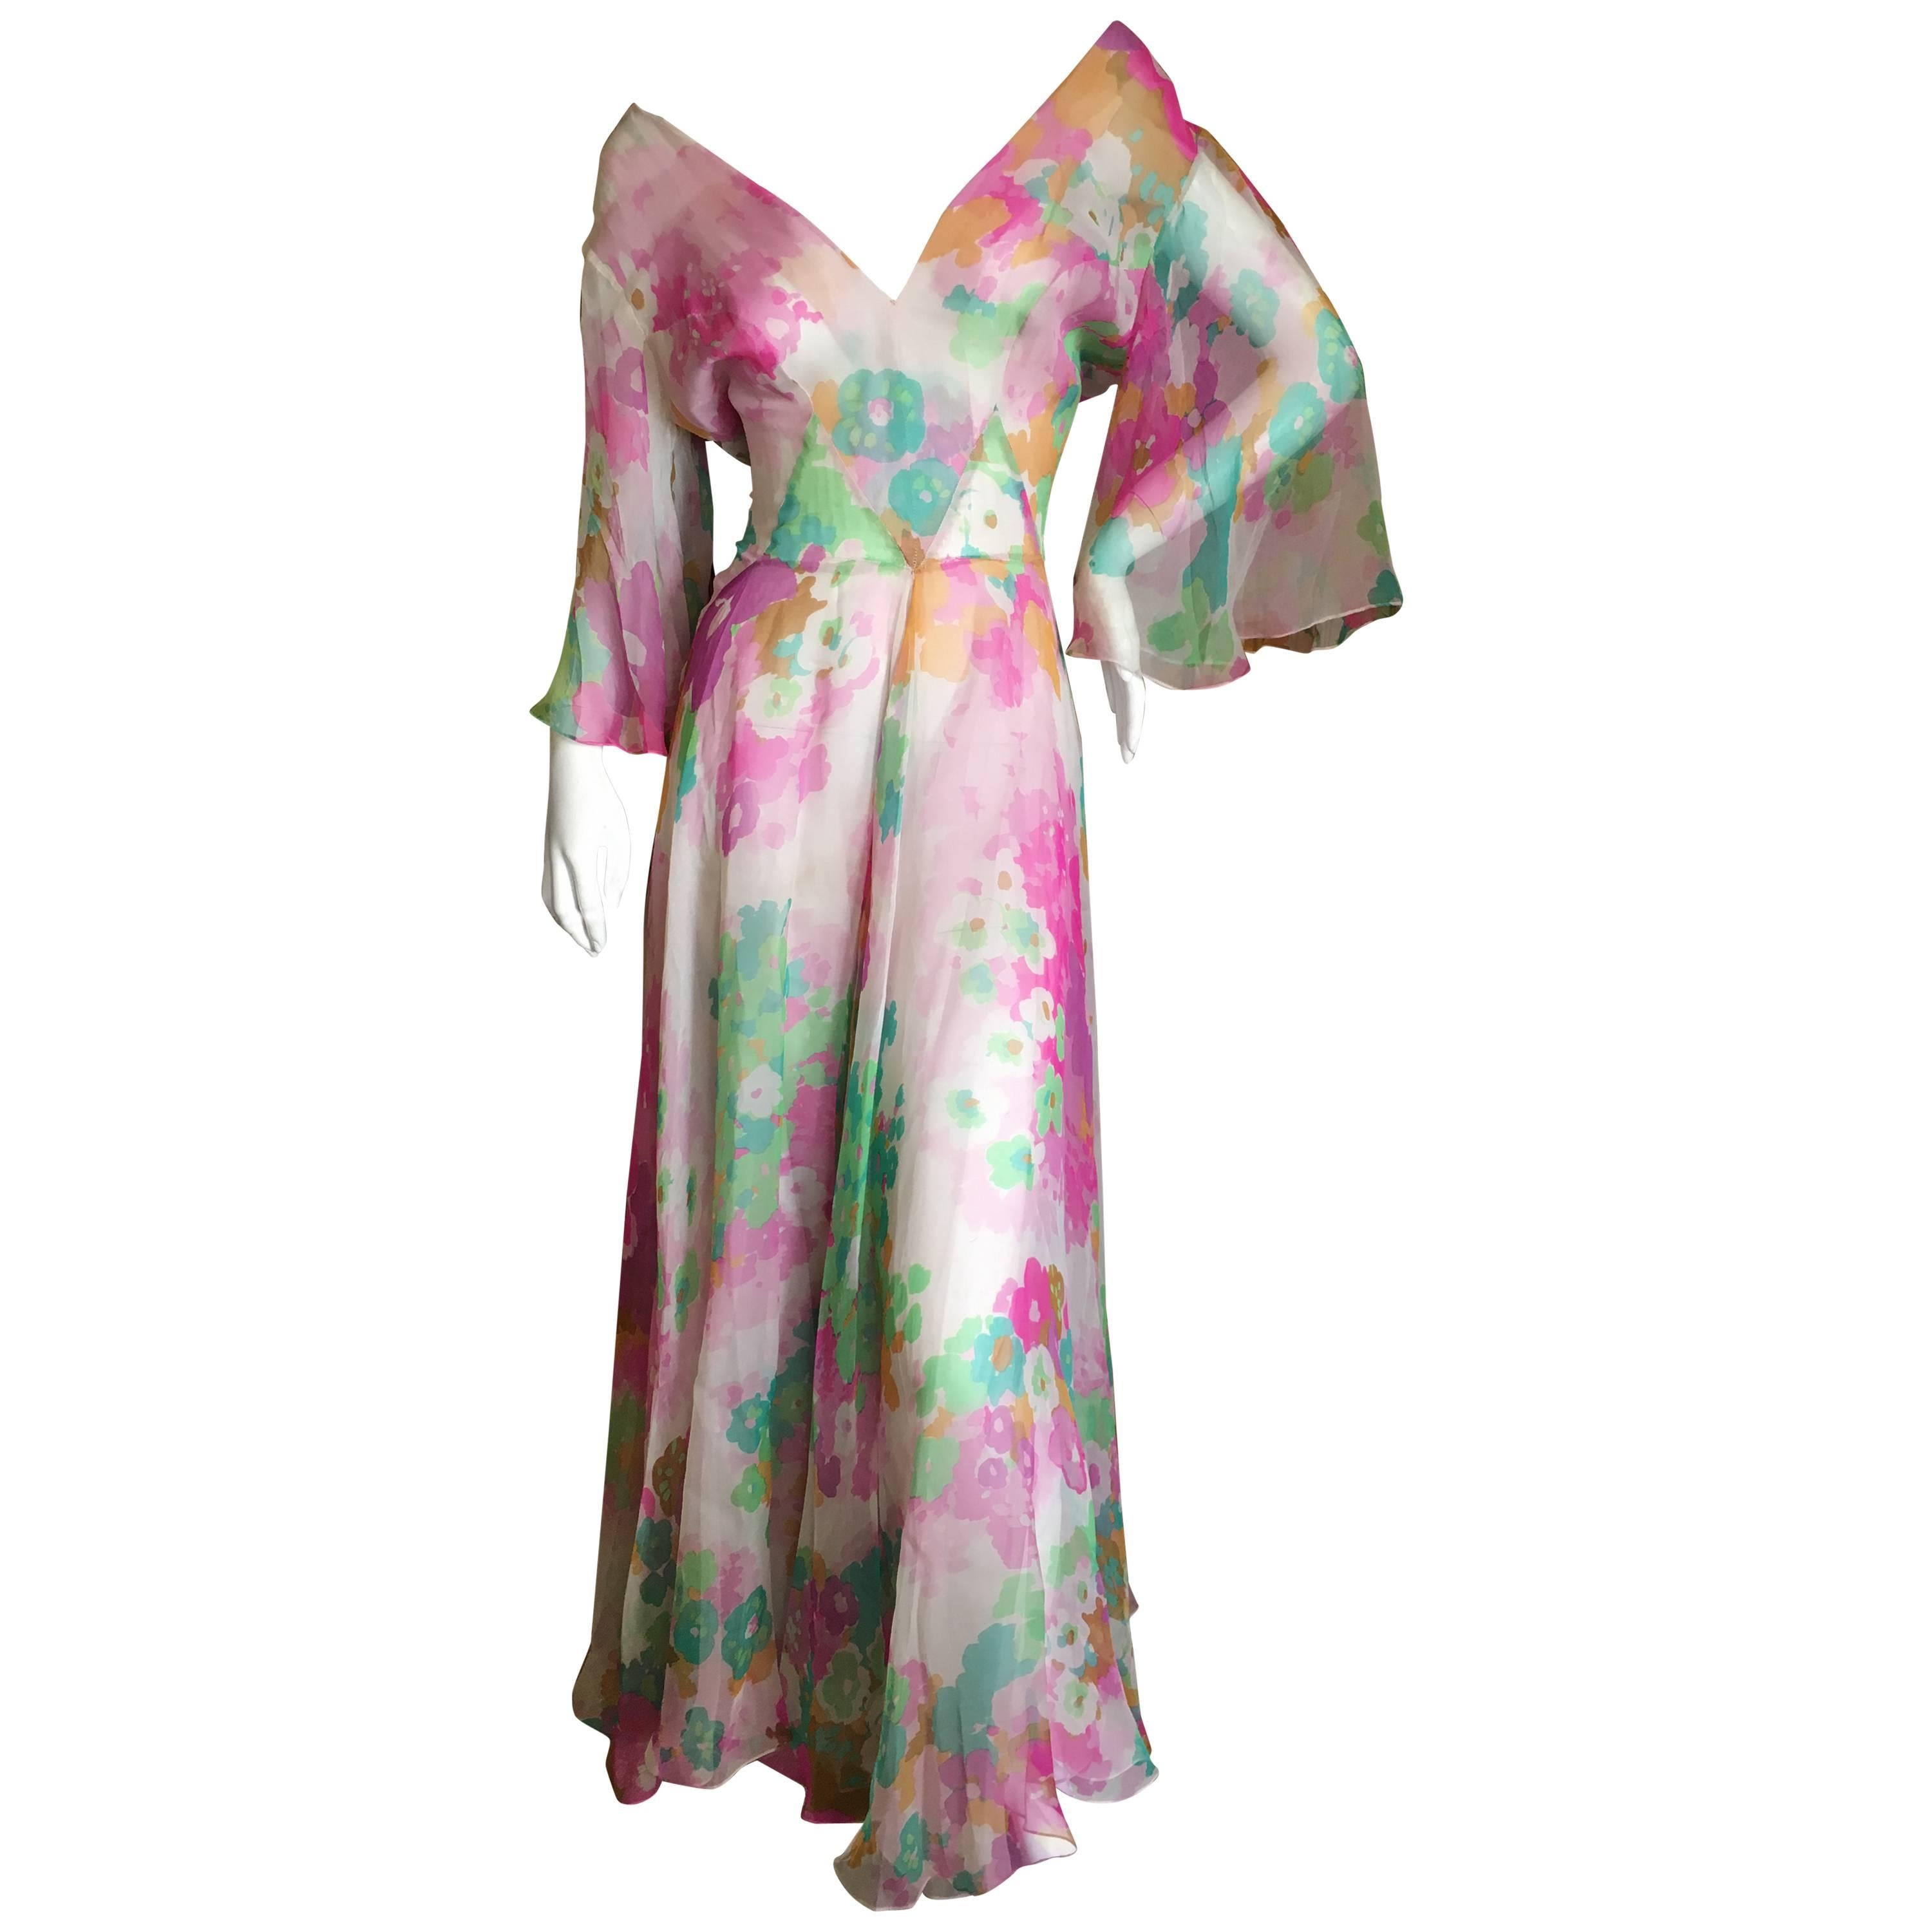 Christian Dior 1960's Demi Couture Numbered Low Cut Floral Silk Chiffon Dress For Sale